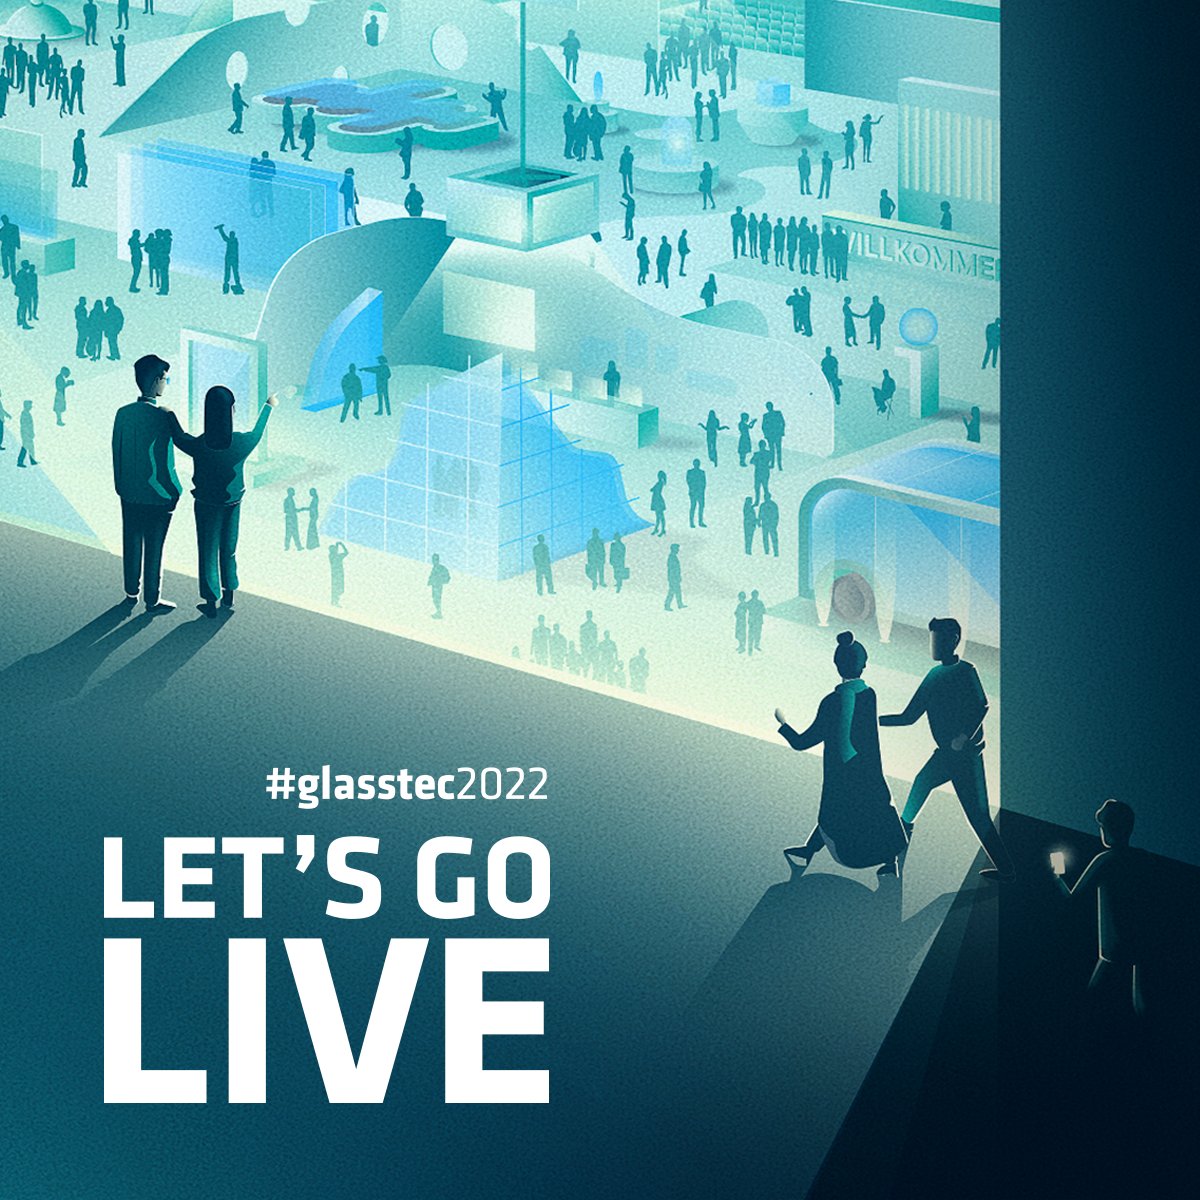 The countdown is on! 🚀glasstec sets new standards in every respect. At glasstec, trends are set that will move the future of glass. Secure your ticket now: bit.ly/3HA9dtc #glass #glassindustry #glasstec #tradefair #düsseldorf#letsgolive #finallytradefair